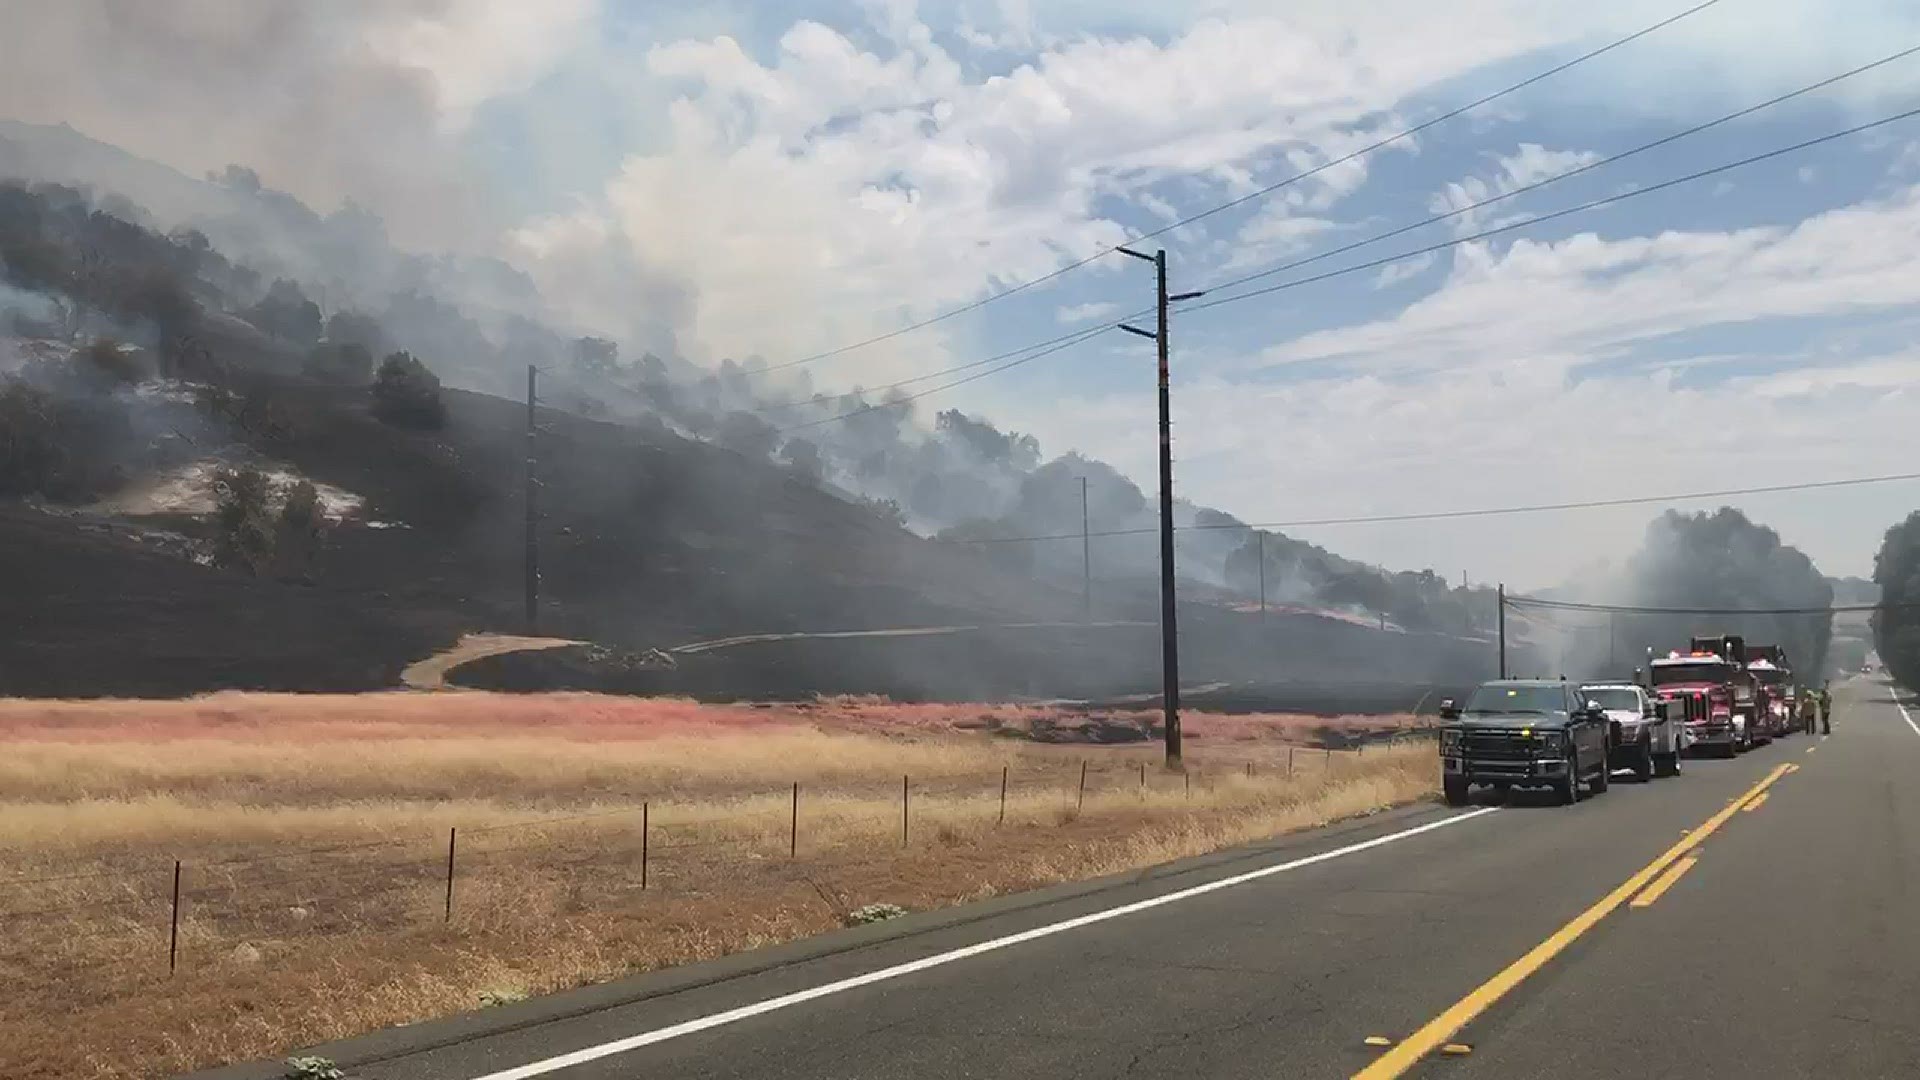 A brush fire was threatening homes and forcing residents to evacuate Saturday on School House Canyon Road, authorities said.